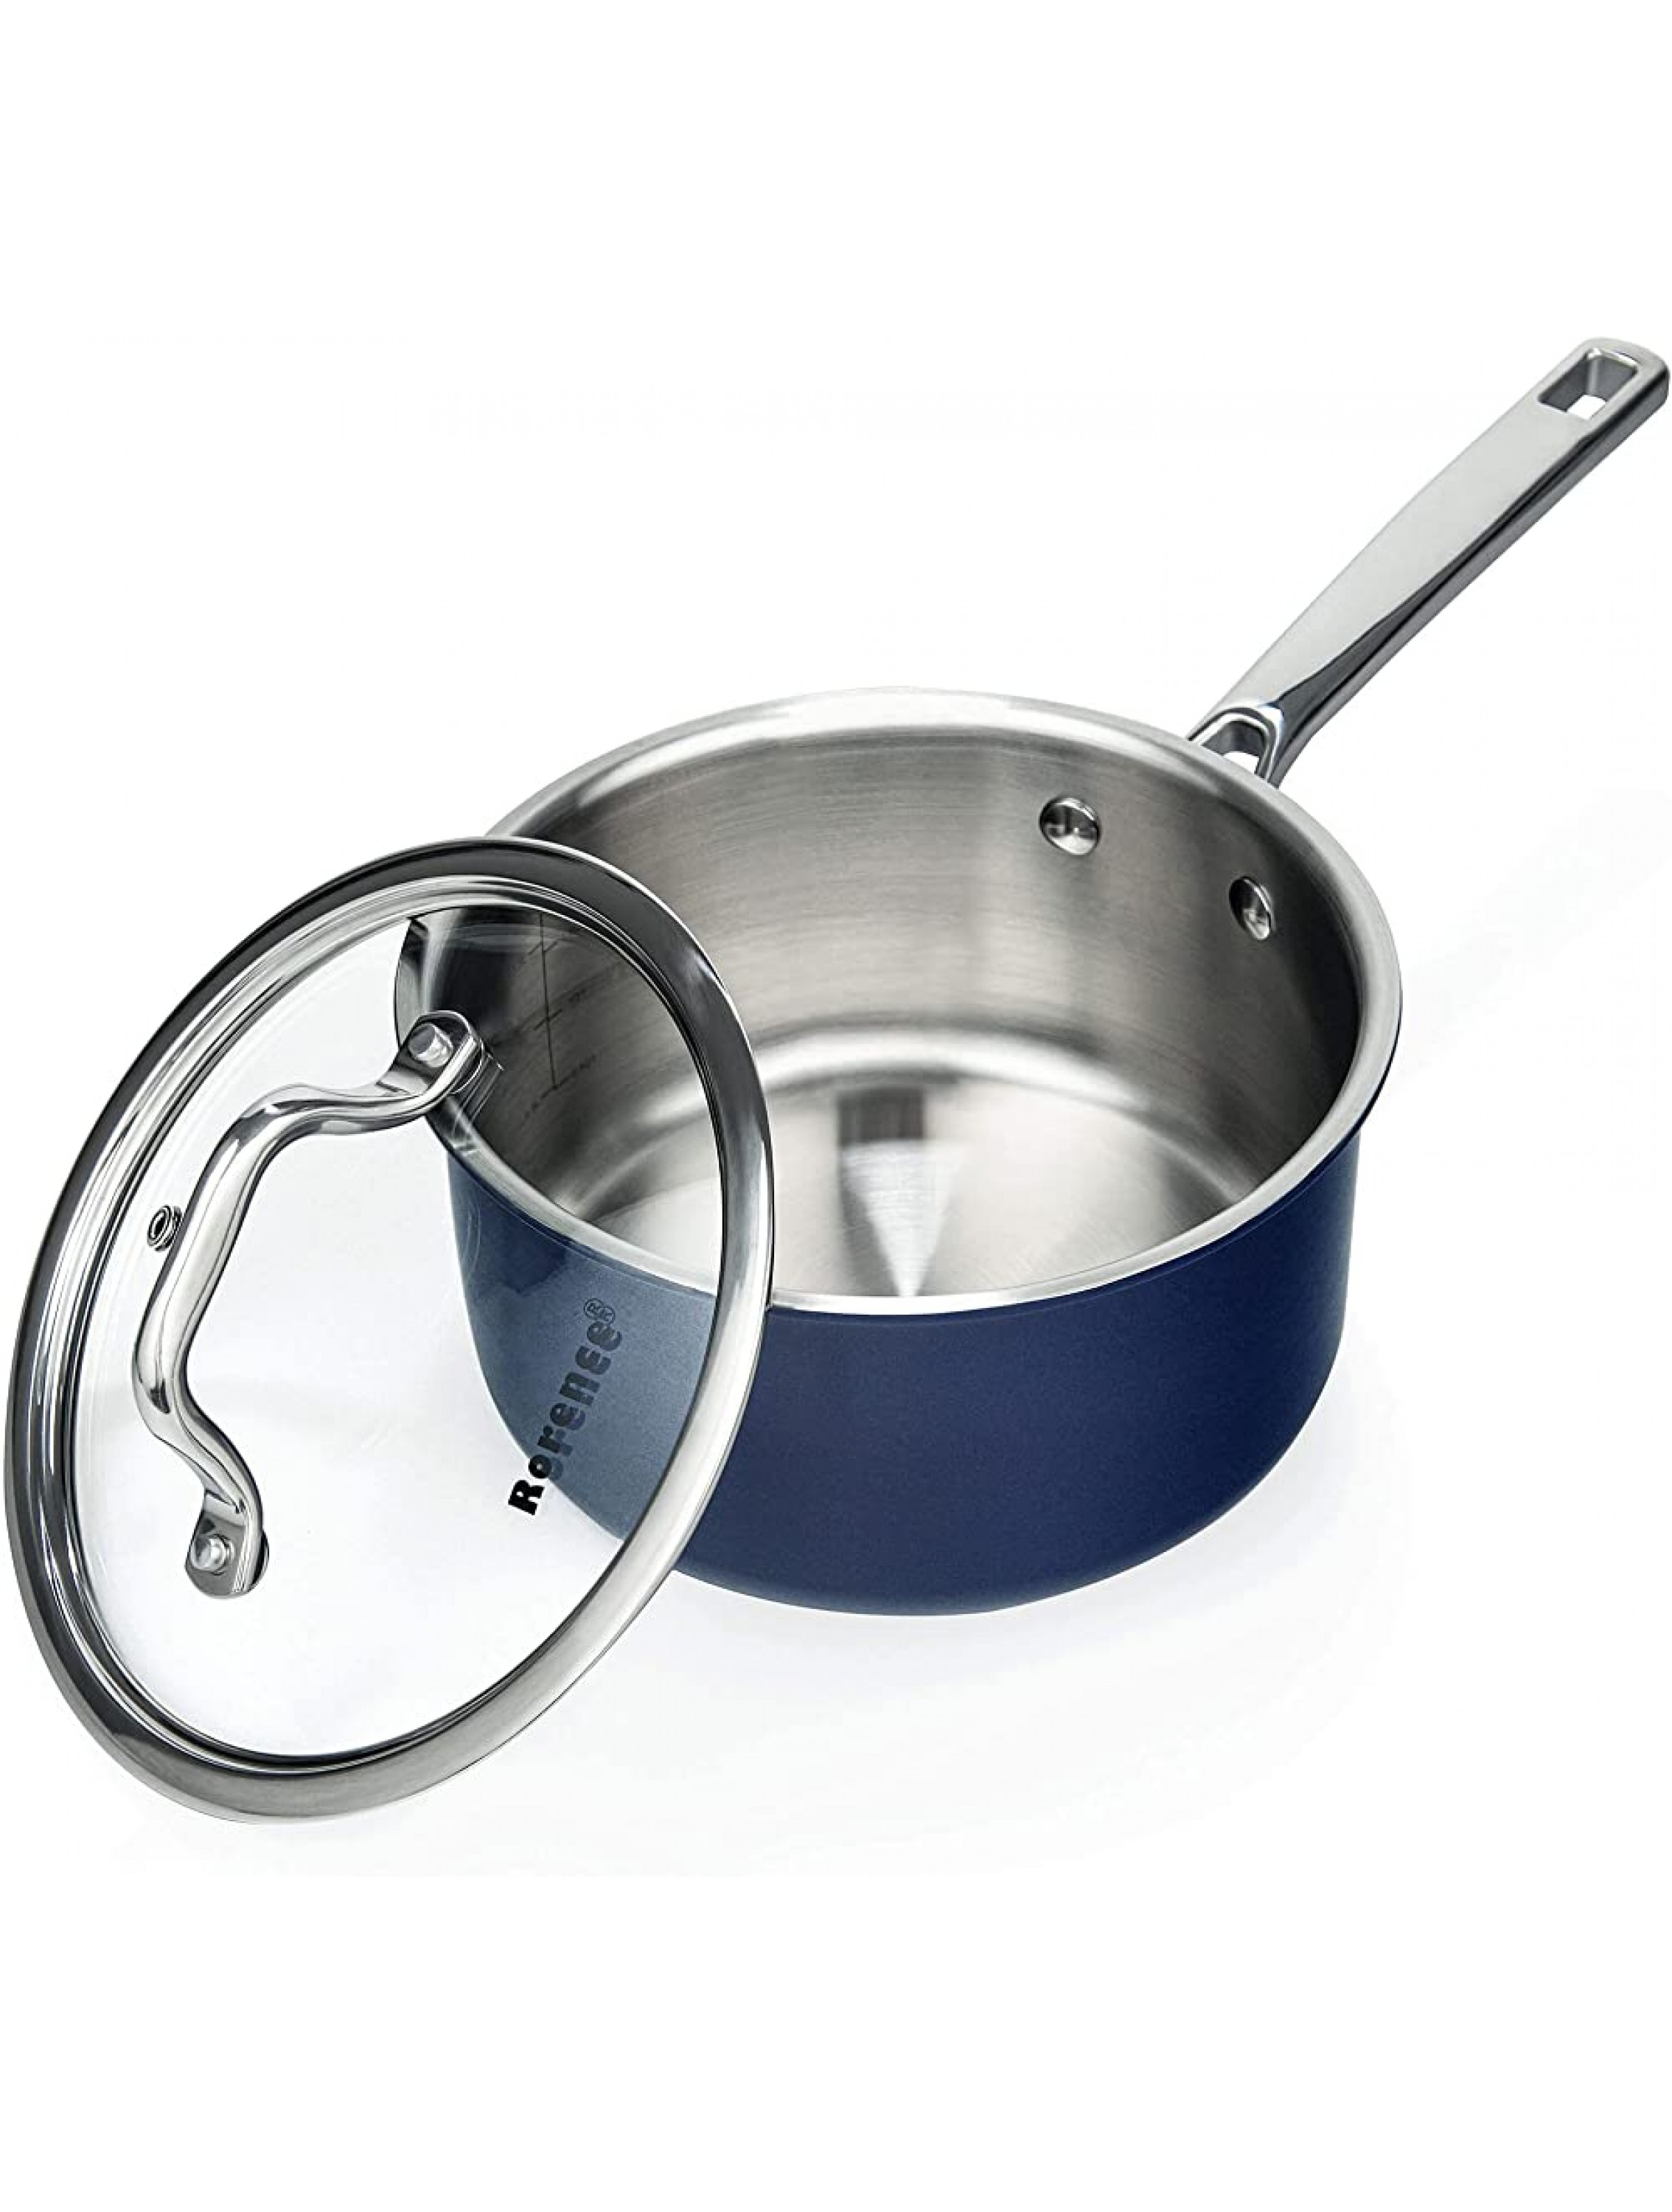 Rorence Stainless Steel Saucepan: 2-Ply Healthy Soup Pot with Glass Lid Navy Blue 2.5 Quart - BH3K0HHI0